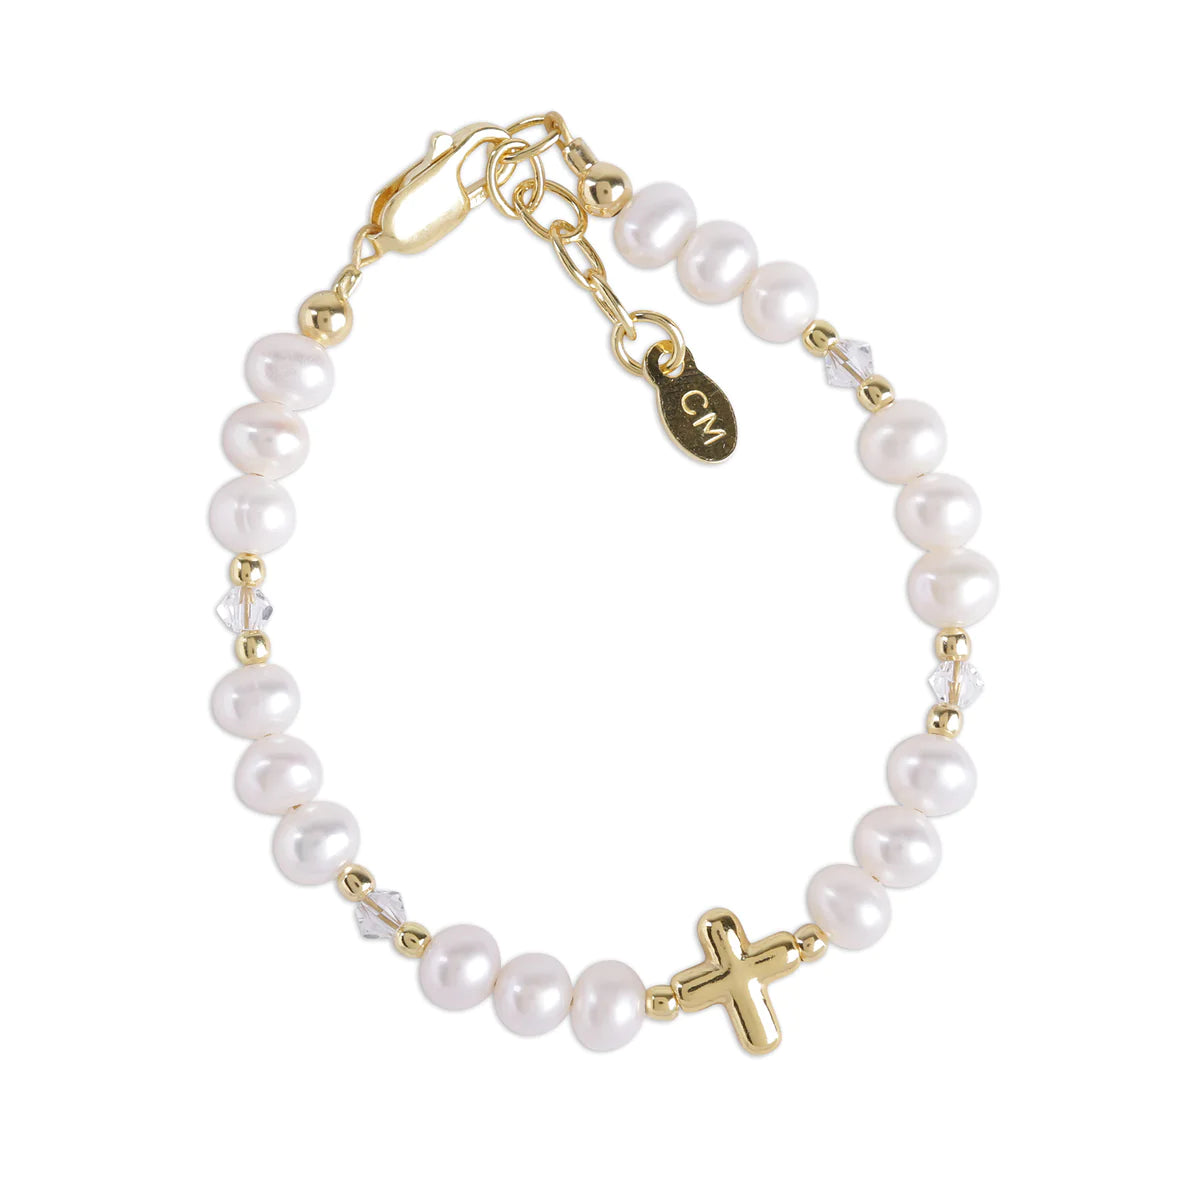 Cherished Moment Baby Girl Bracelets – Willow at Merle Norman